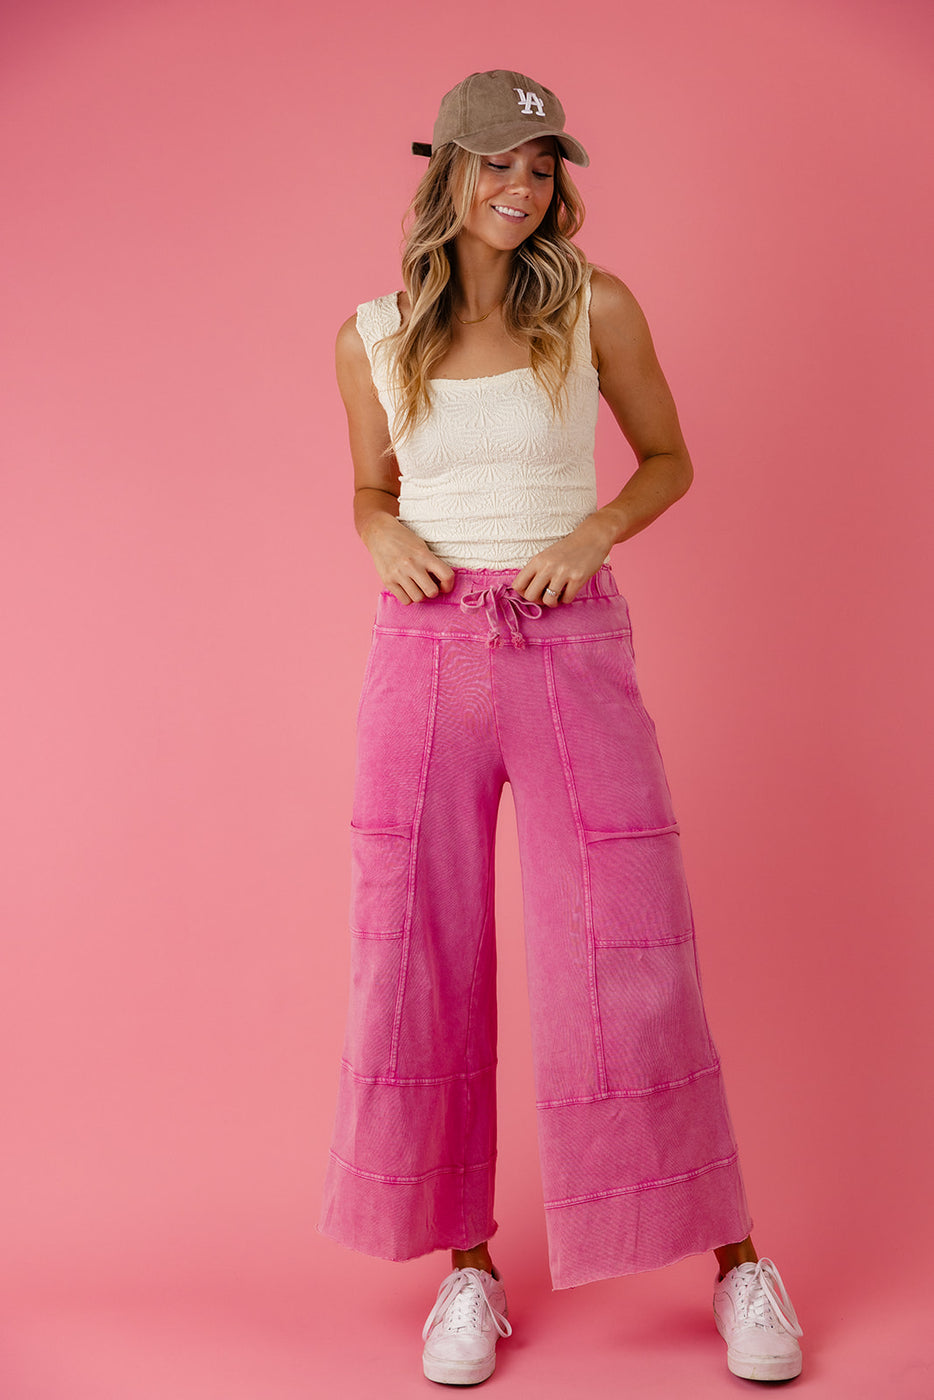 a woman in pink pants